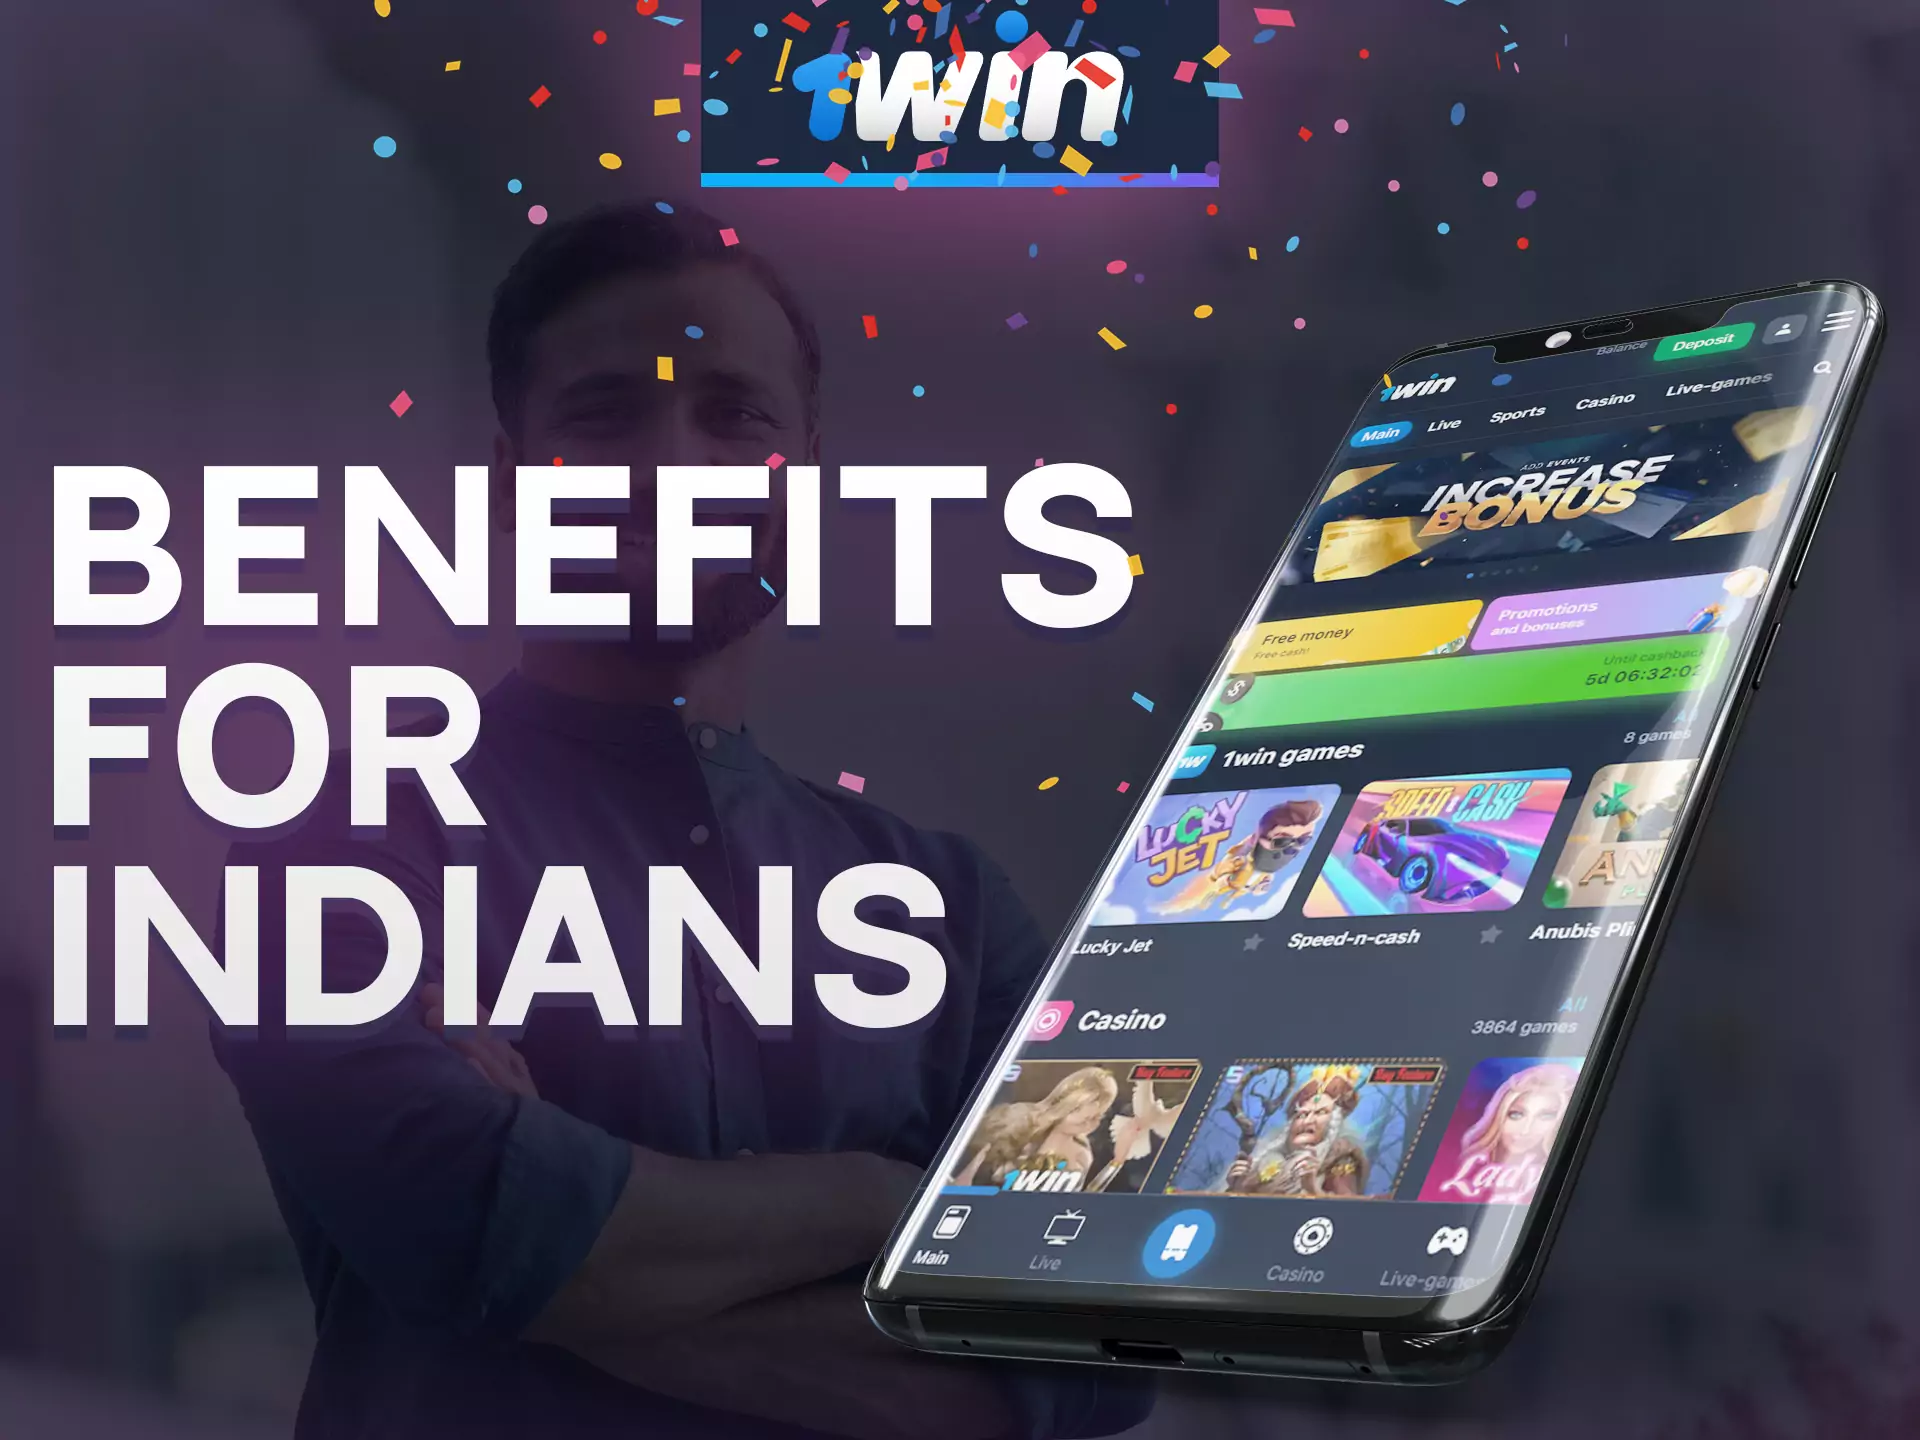 Learn more about 1win app benefits.